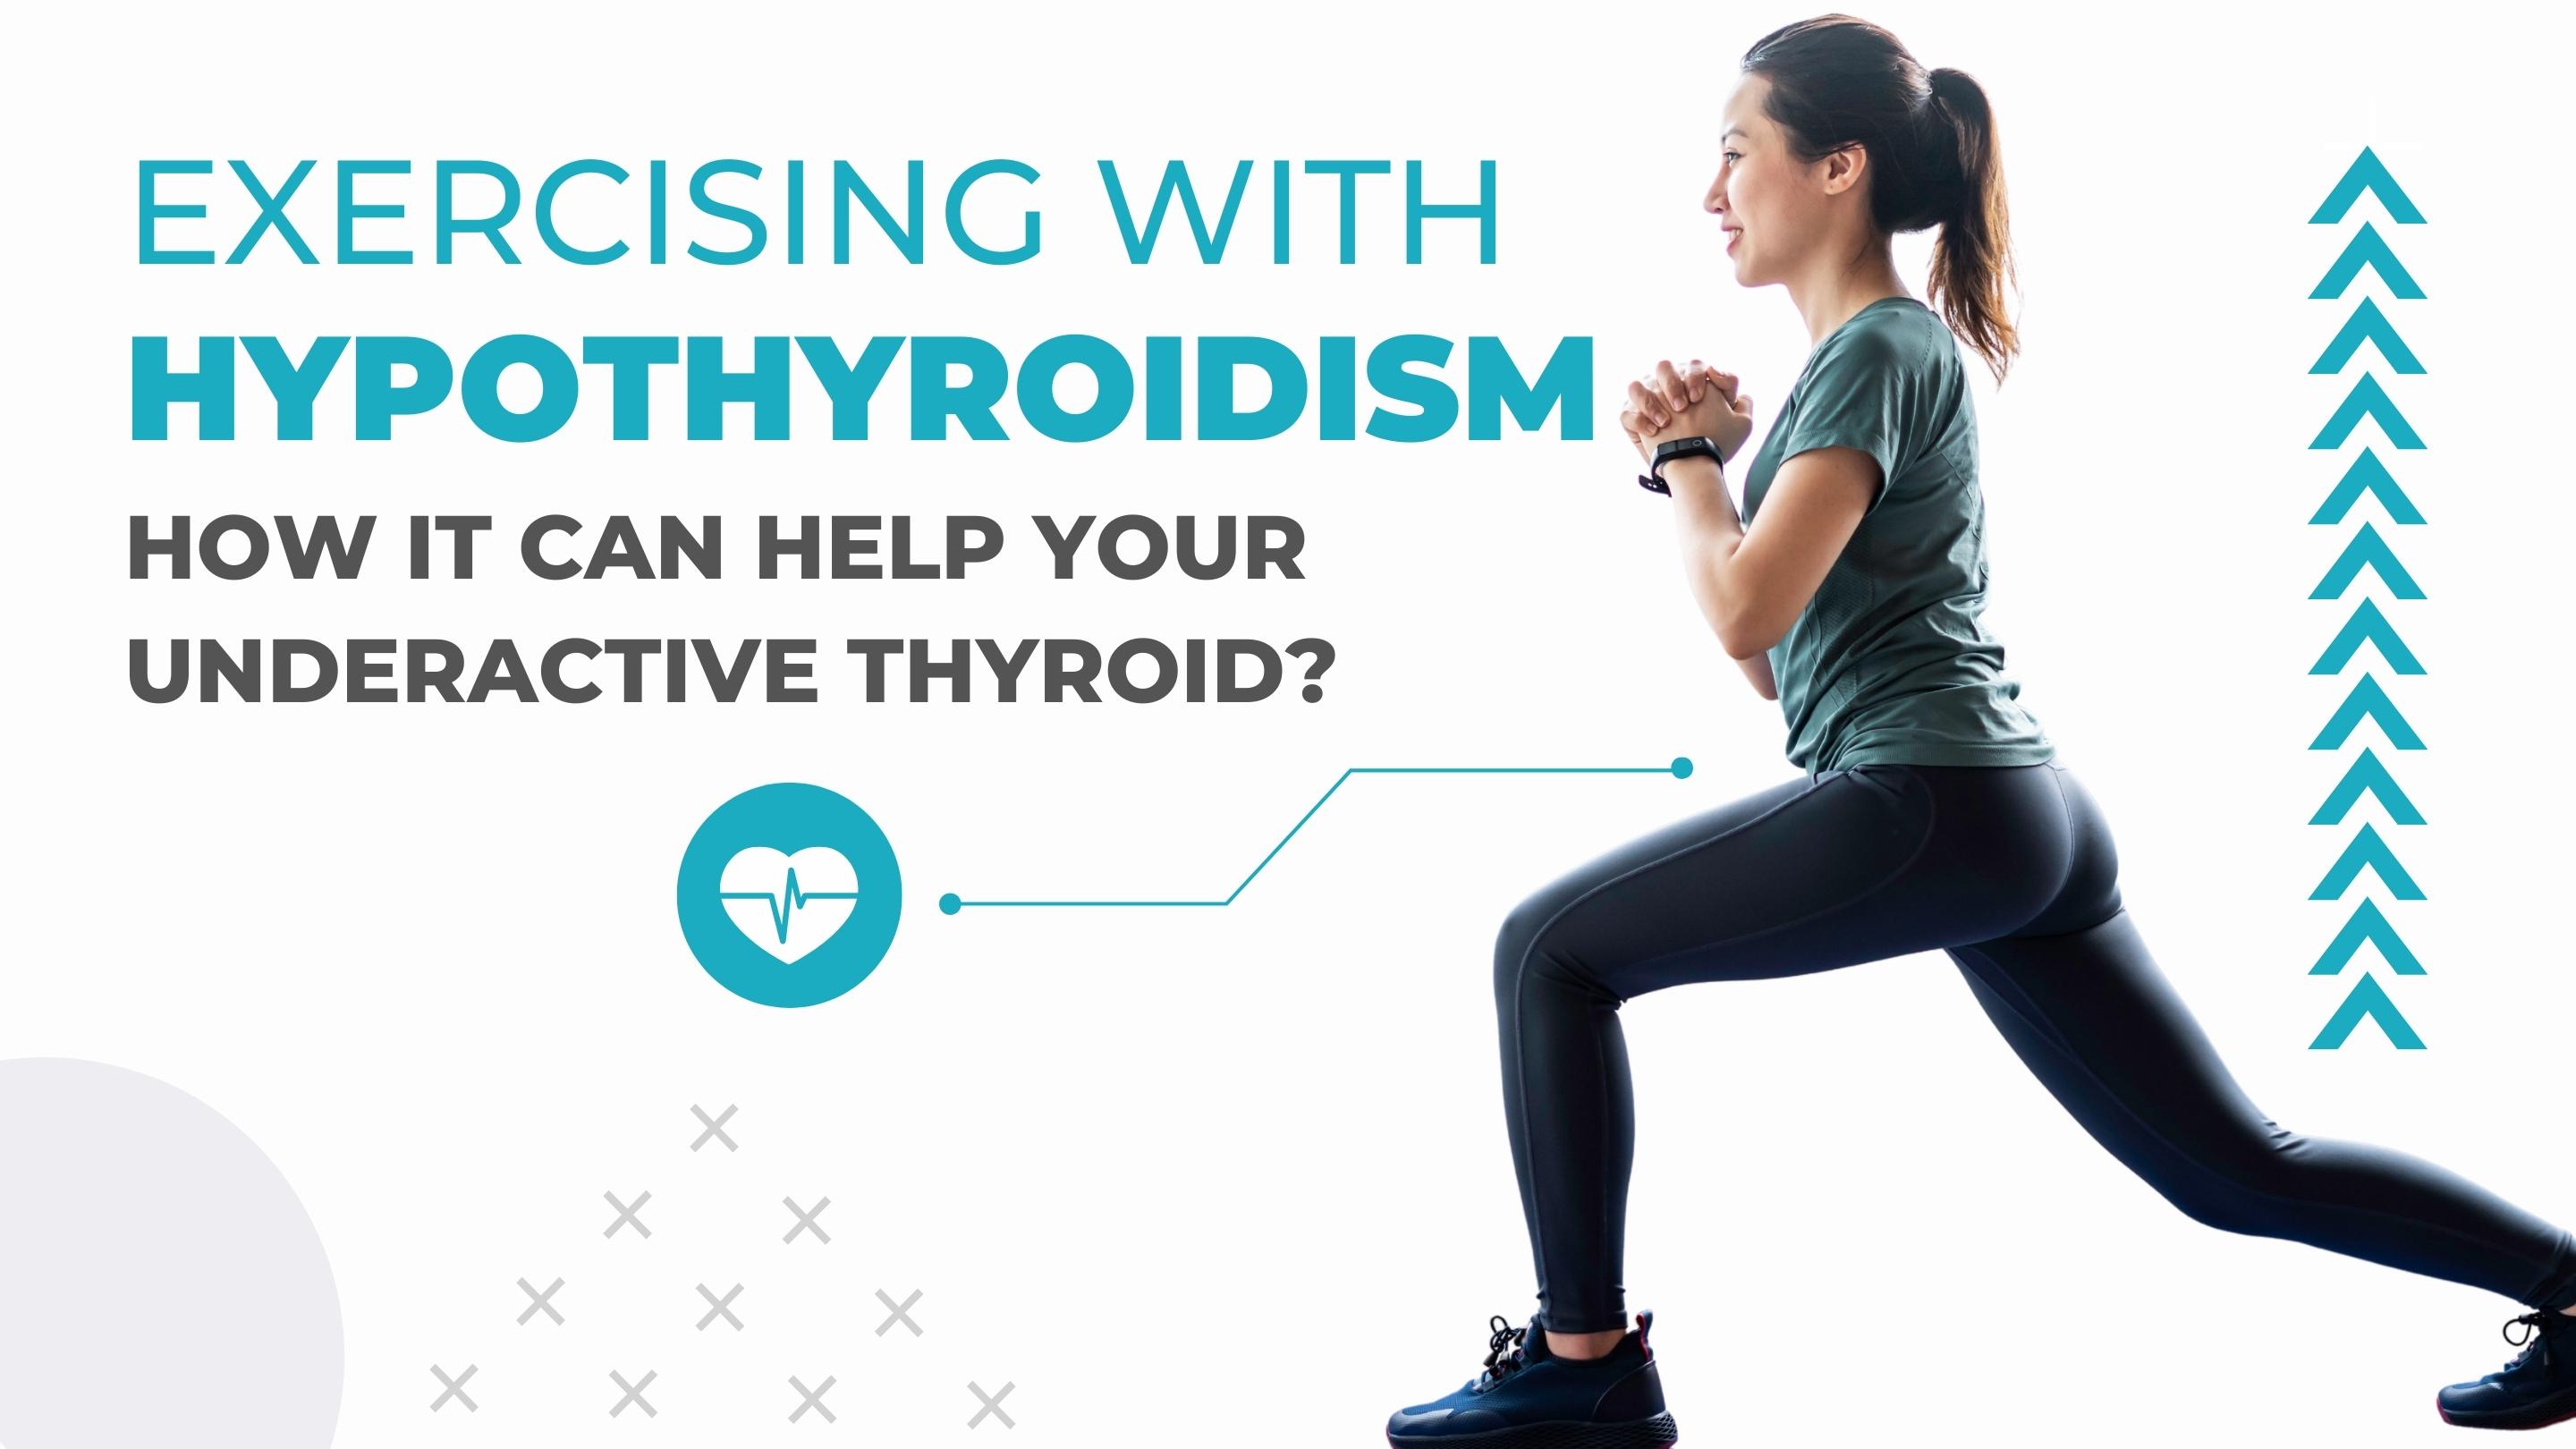 Exercising with hypothyroidism